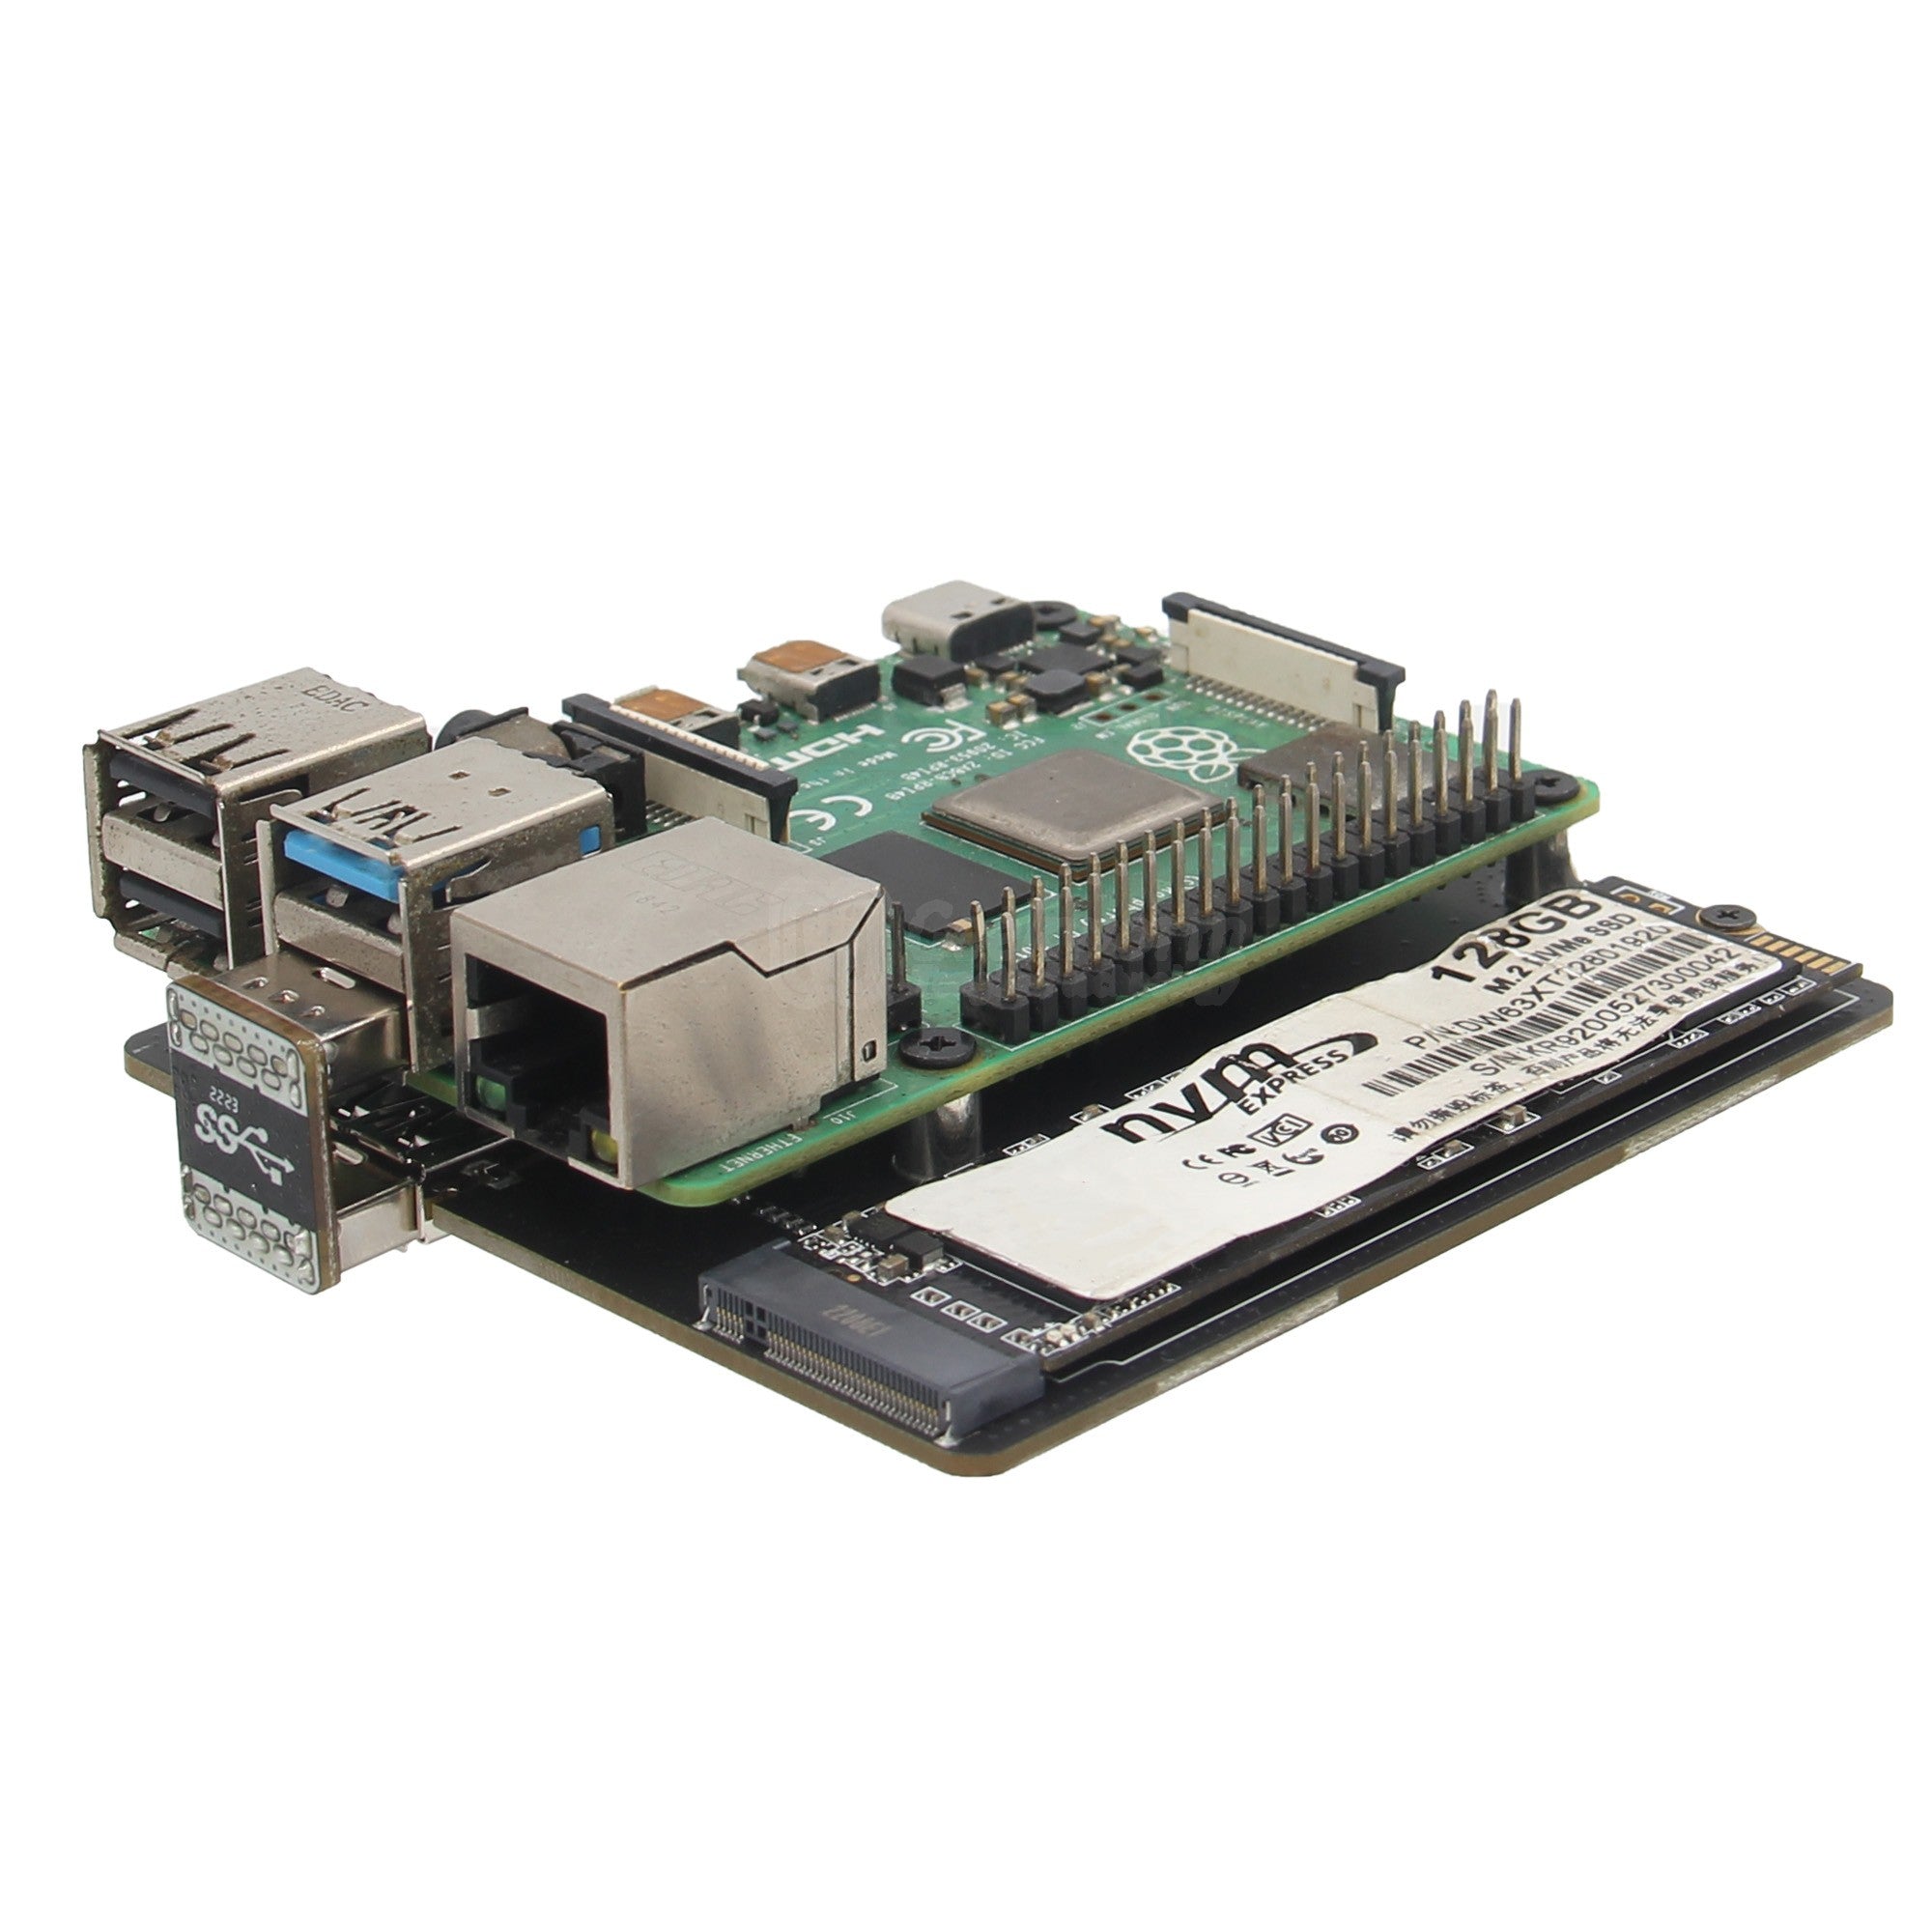 Two PCIe-to-USB bridge chip solution to use NVMe SSD on your Raspberry Pi 4  - Latest Open Tech From Seeed